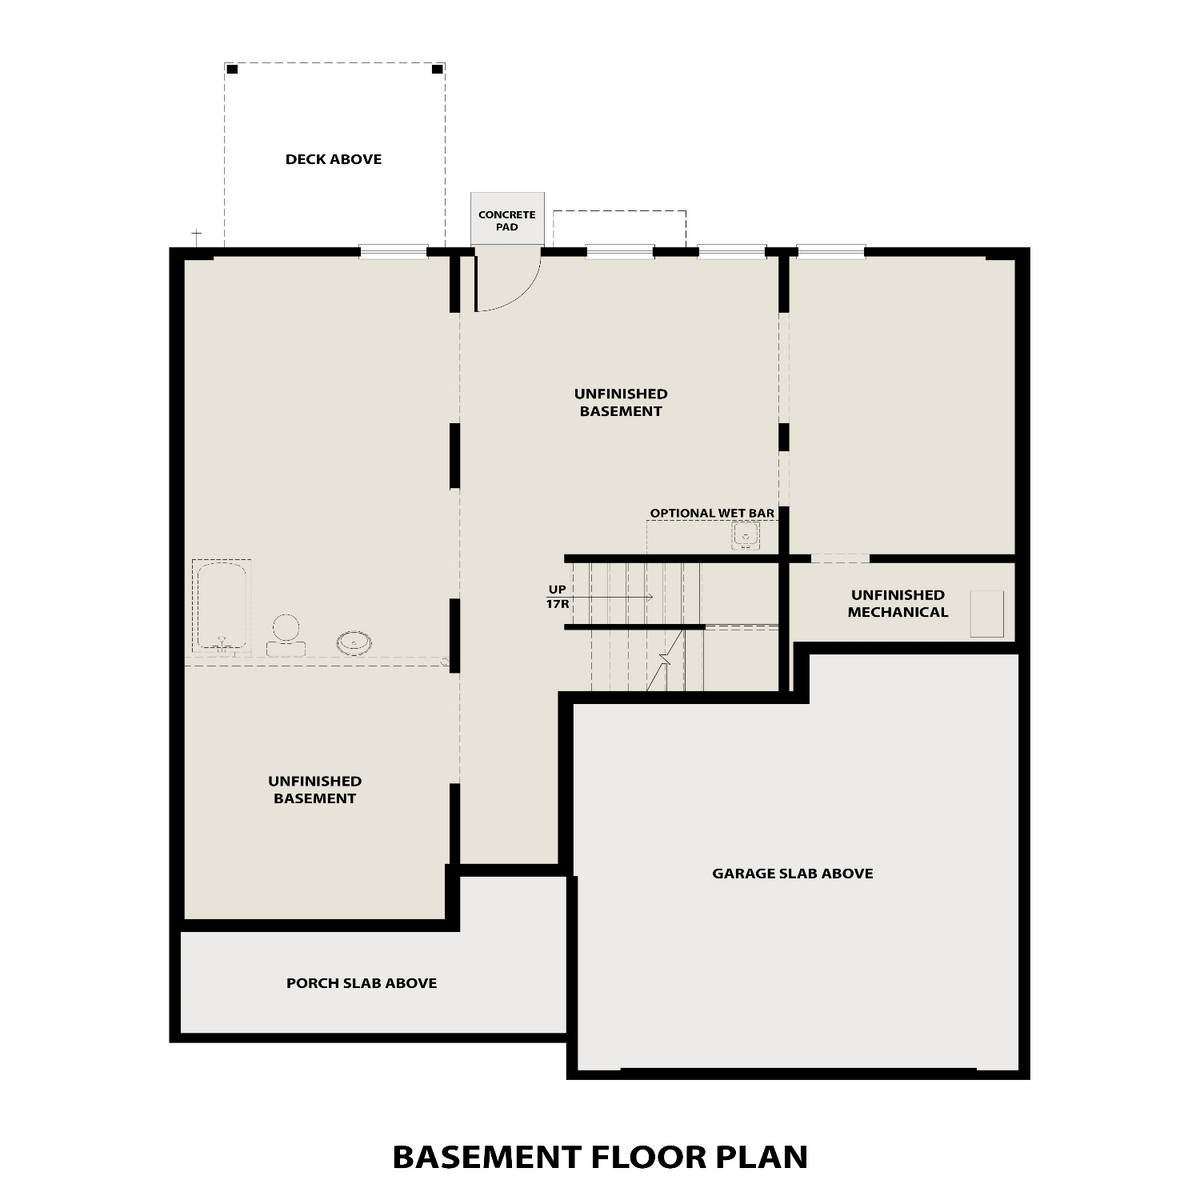 3 - The Willow B- Unfinished Basement floor plan layout for 67 Rolling Rock Way in Davidson Homes' Riverwood community.